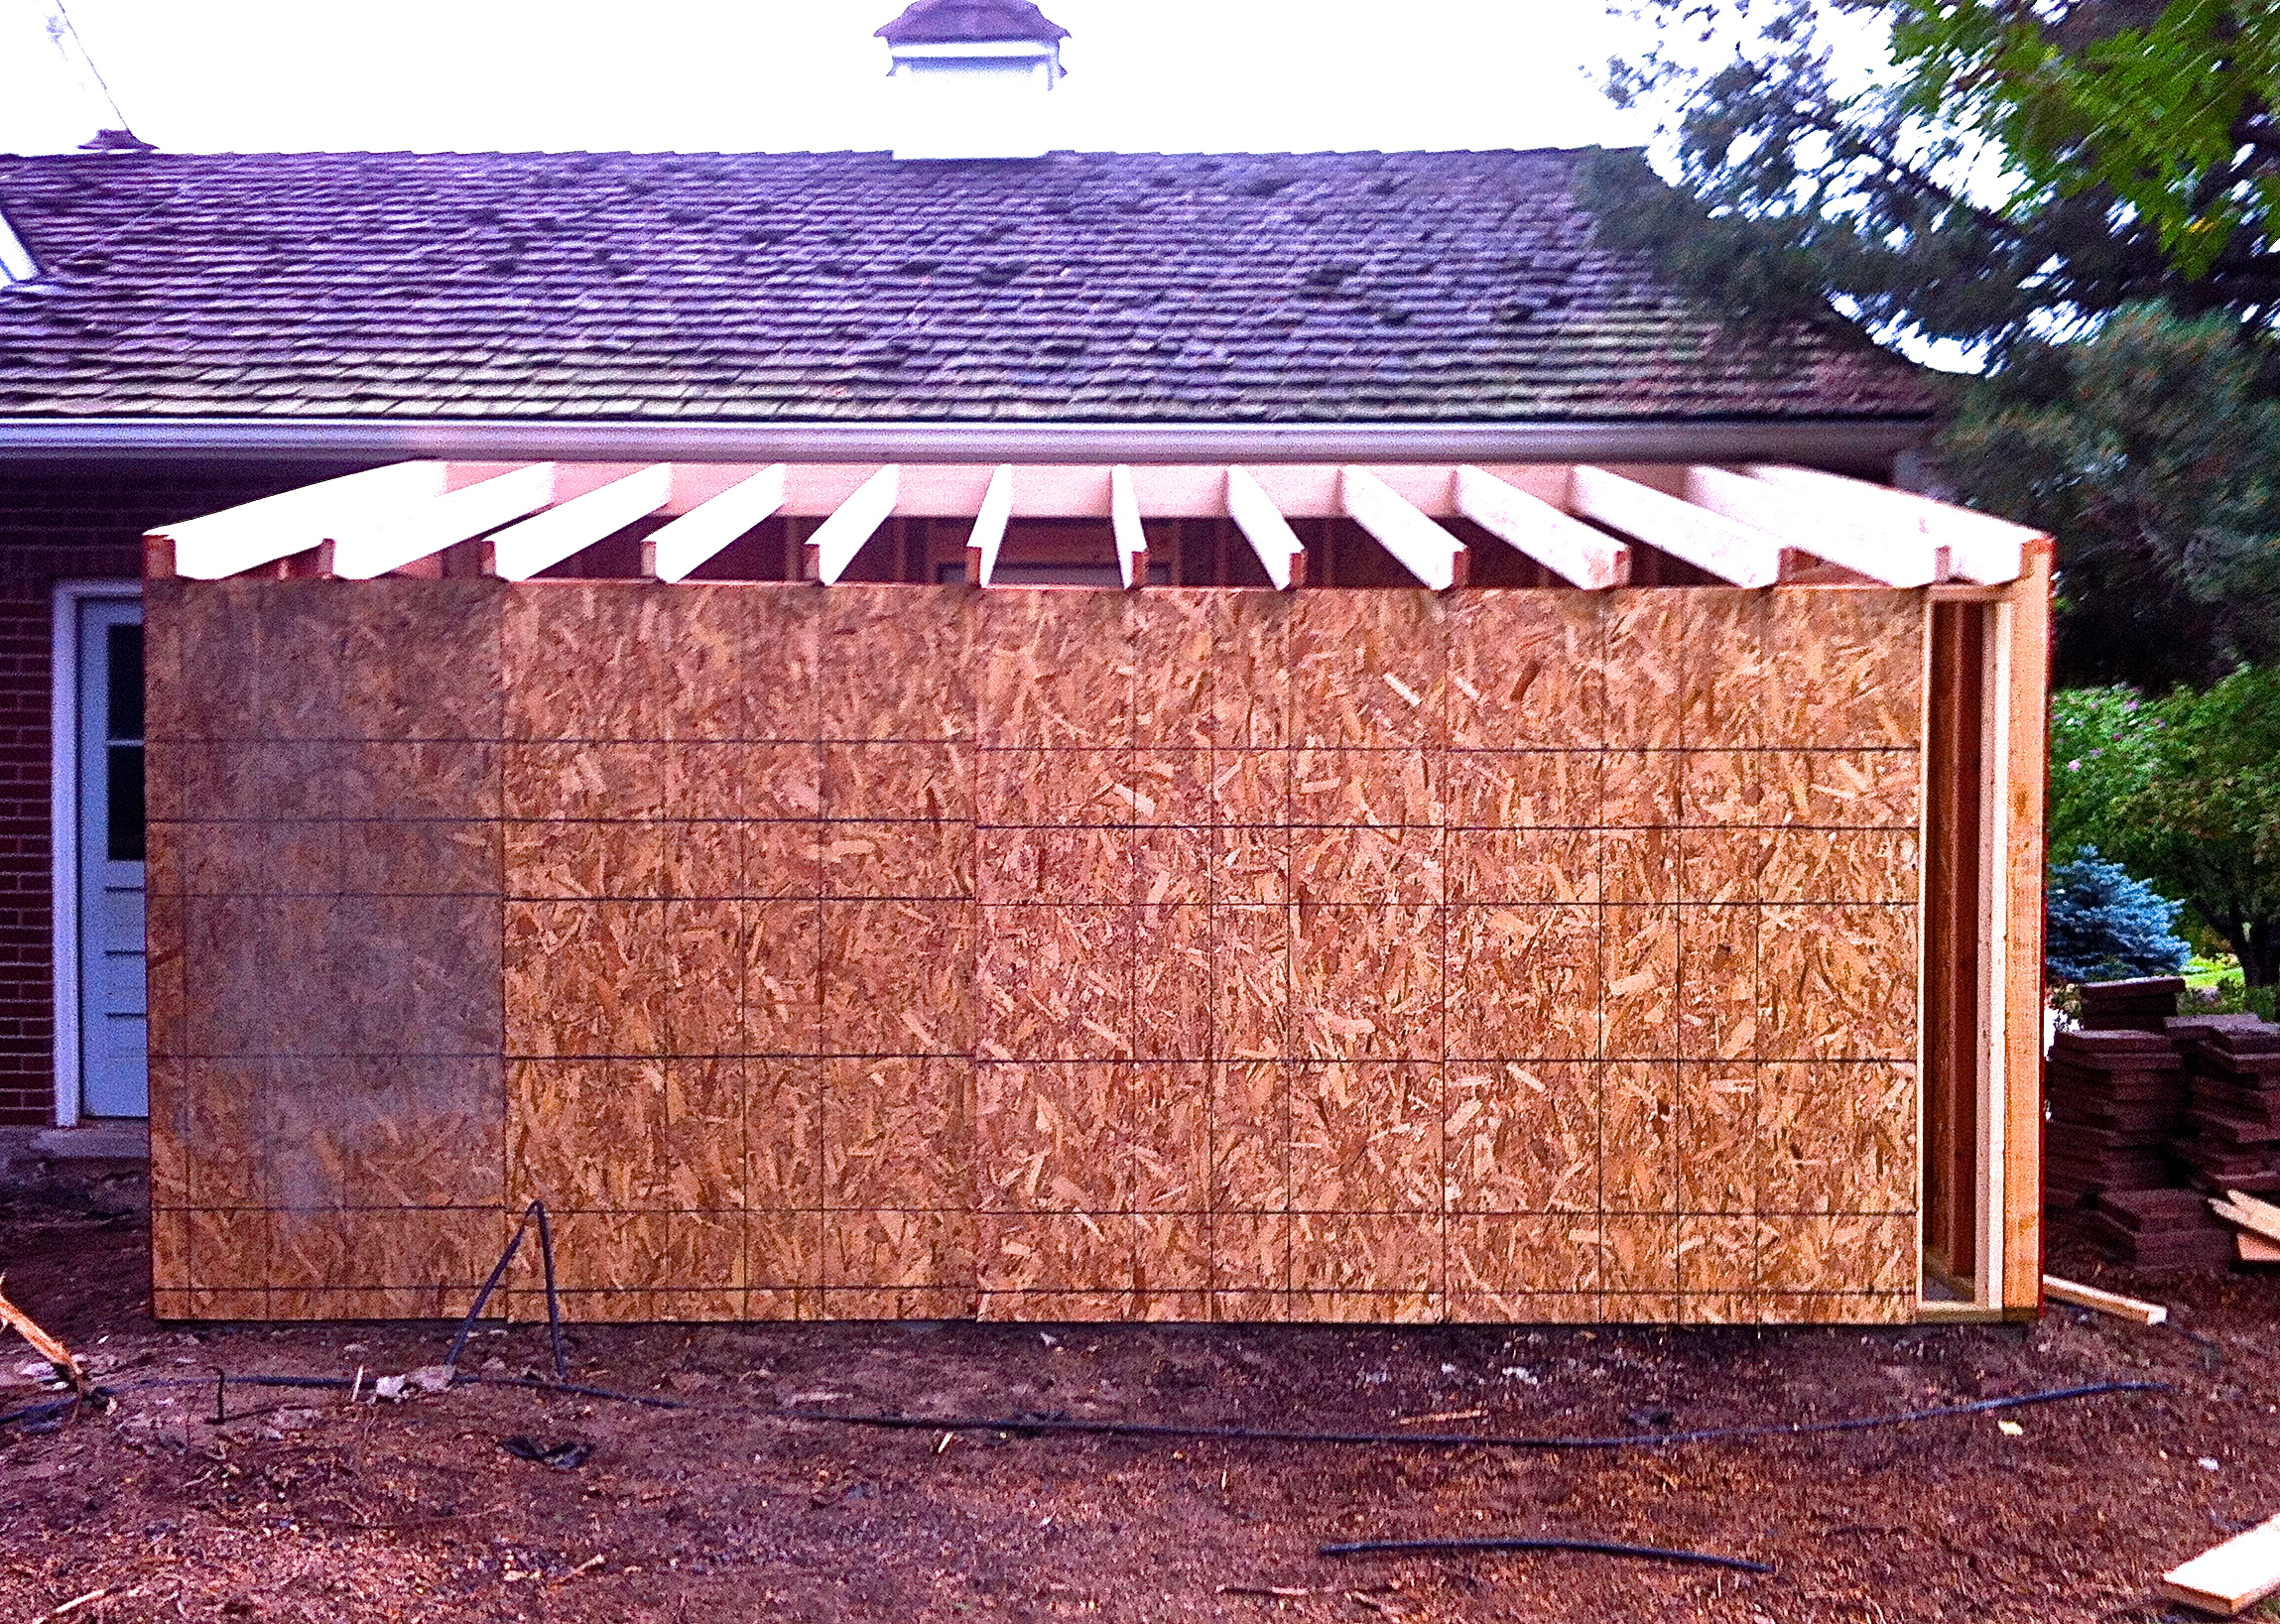 How To Build A Storage Shed Attached To Your Home | Jim ...